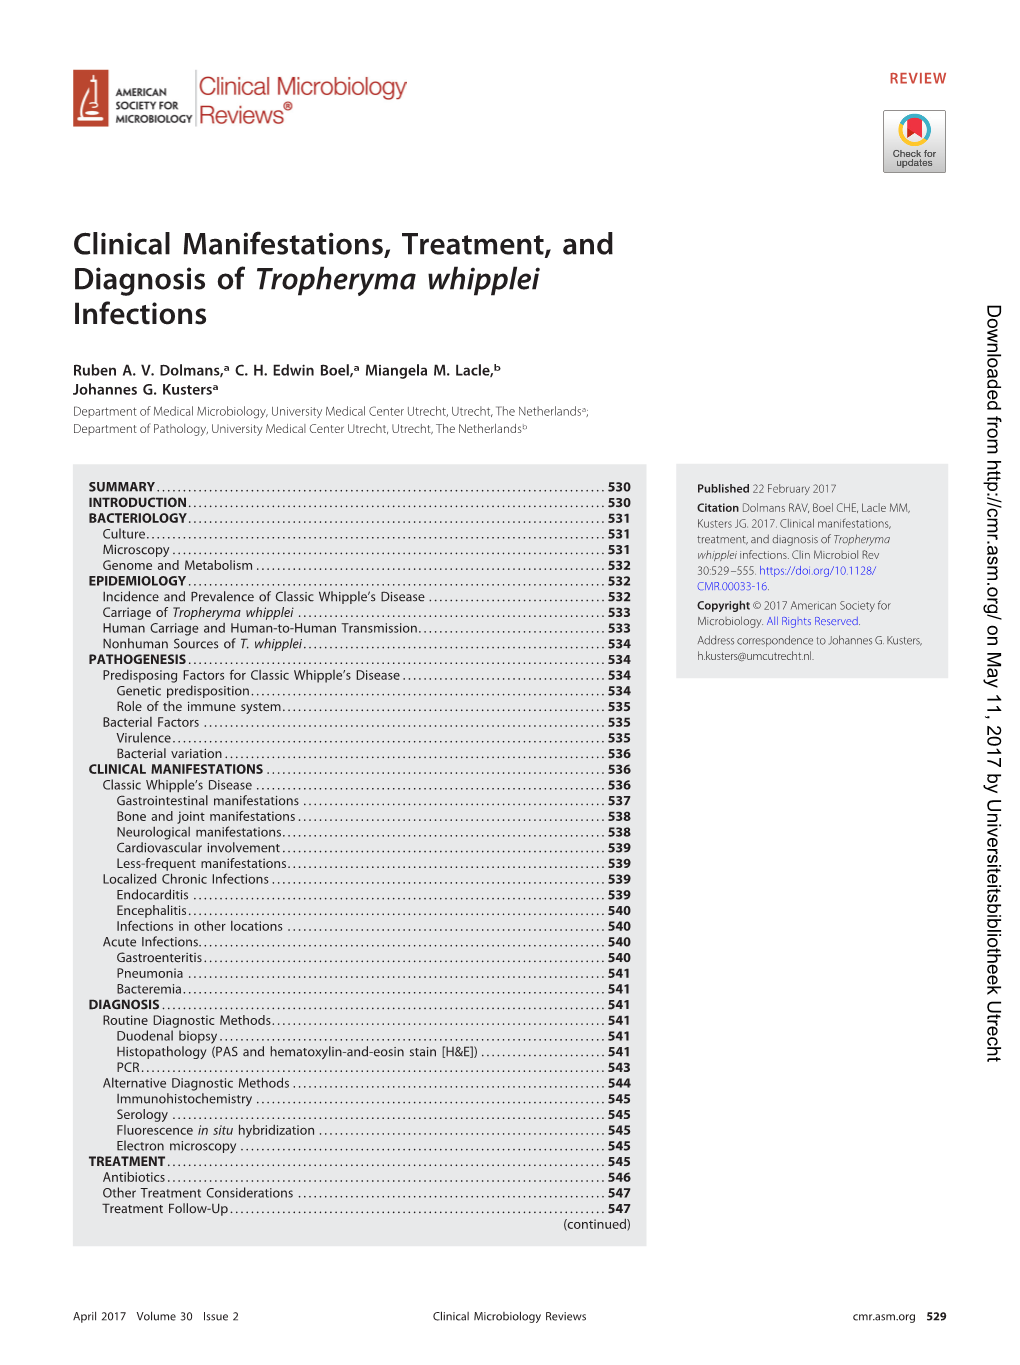 Clinical Manifestations, Treatment, and Diagnosis of Tropheryma Whipplei Infections Downloaded From